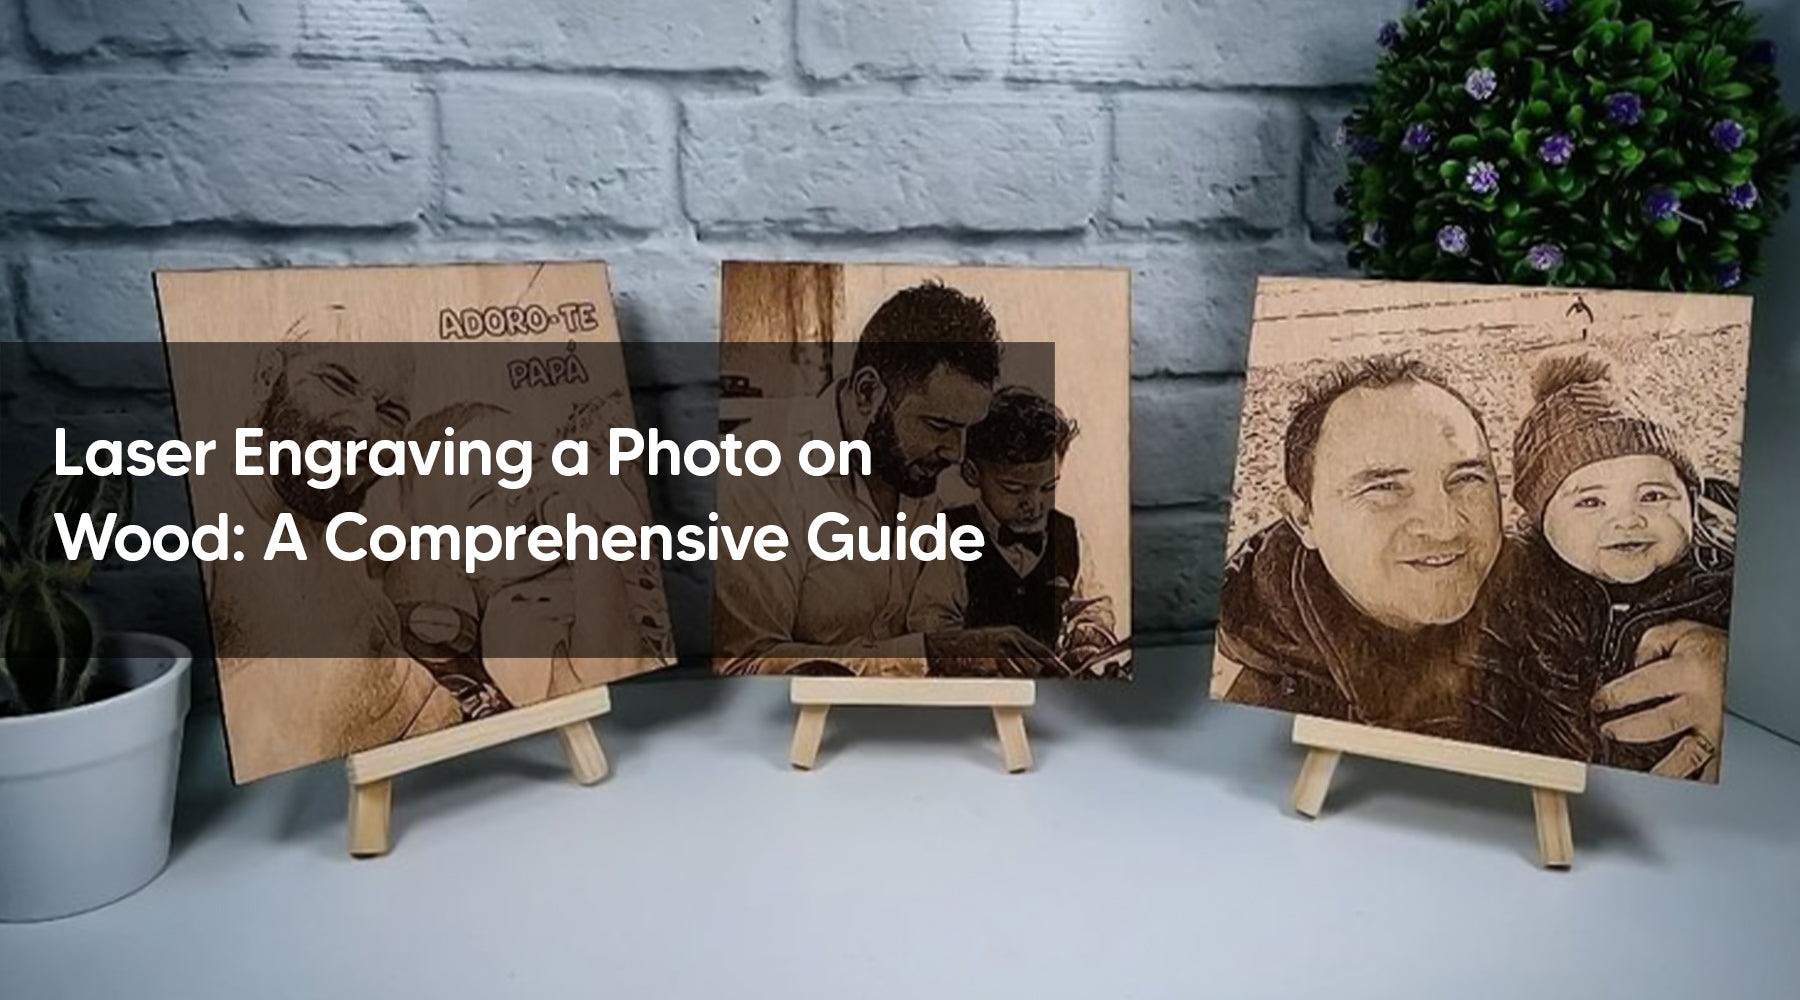 Laser Engraving a Photo on Wood: A Comprehensive Guide